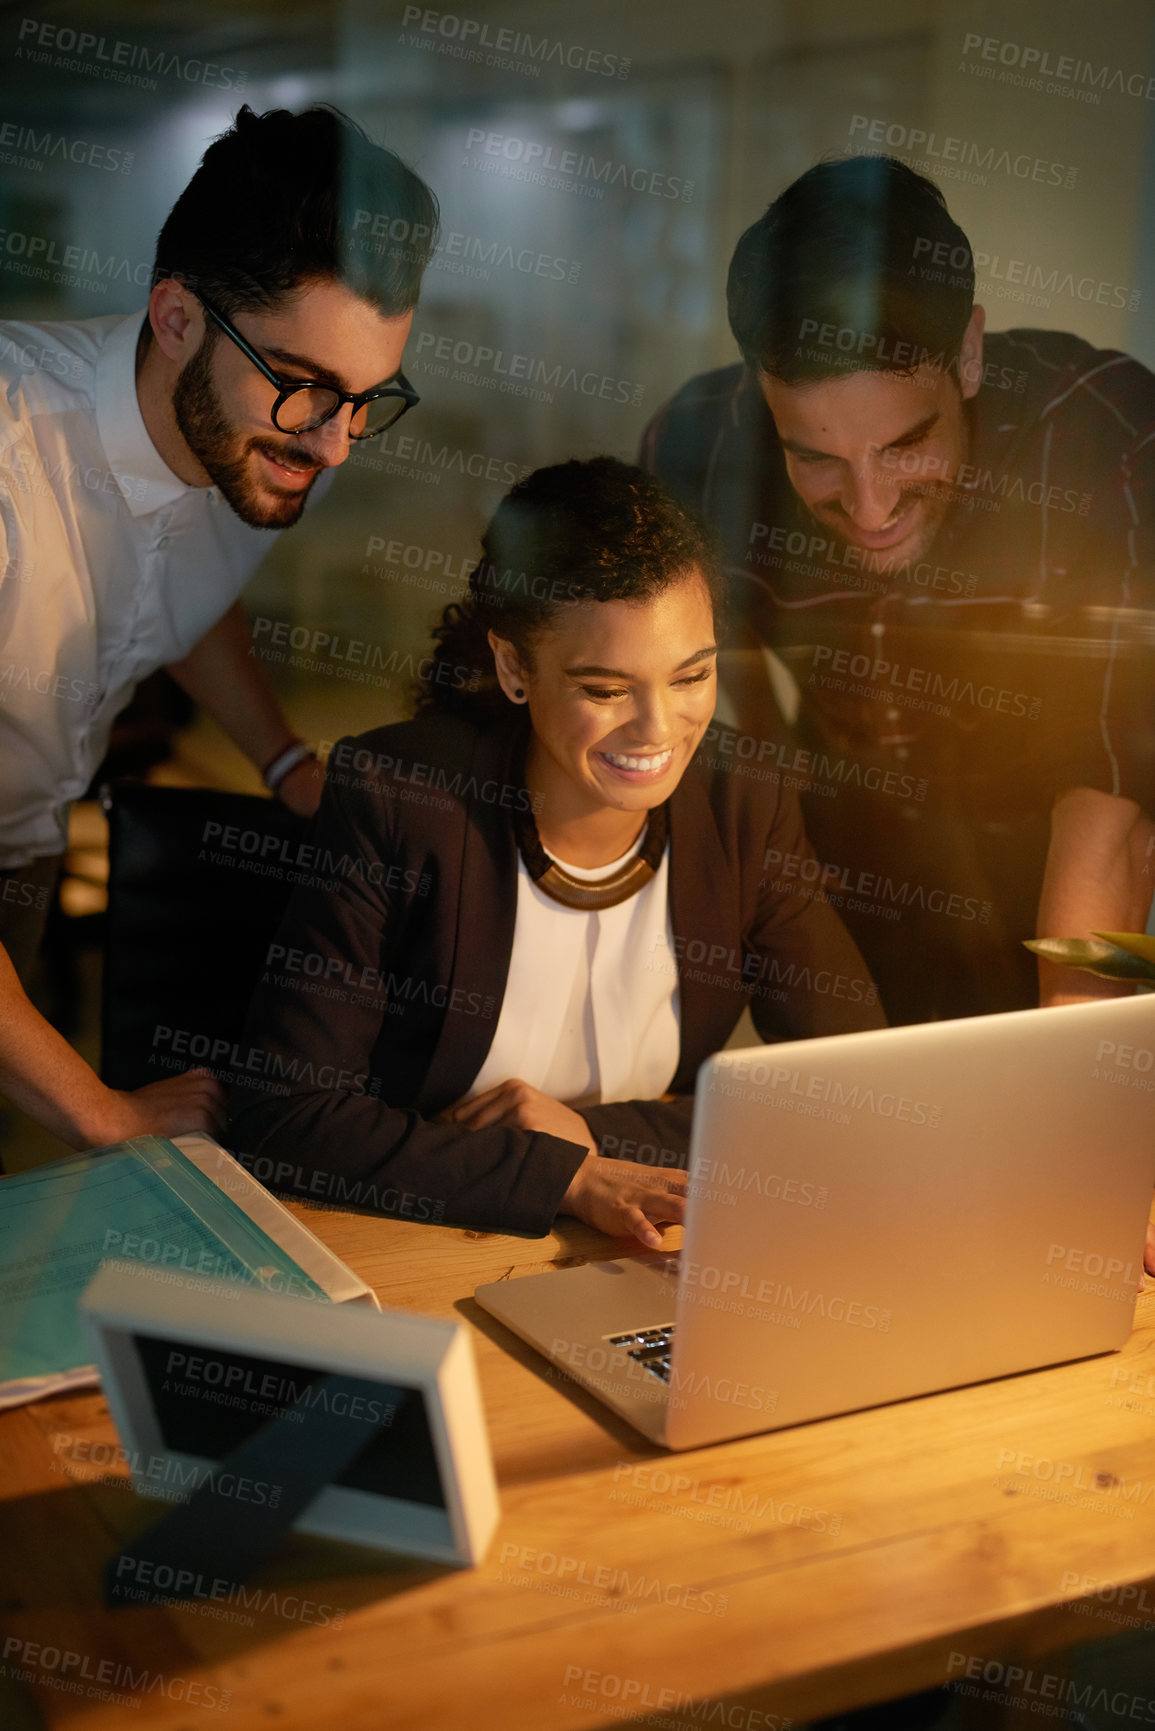 Buy stock photo Shot of a group of businesspeople using a laptop while working overtime in the office